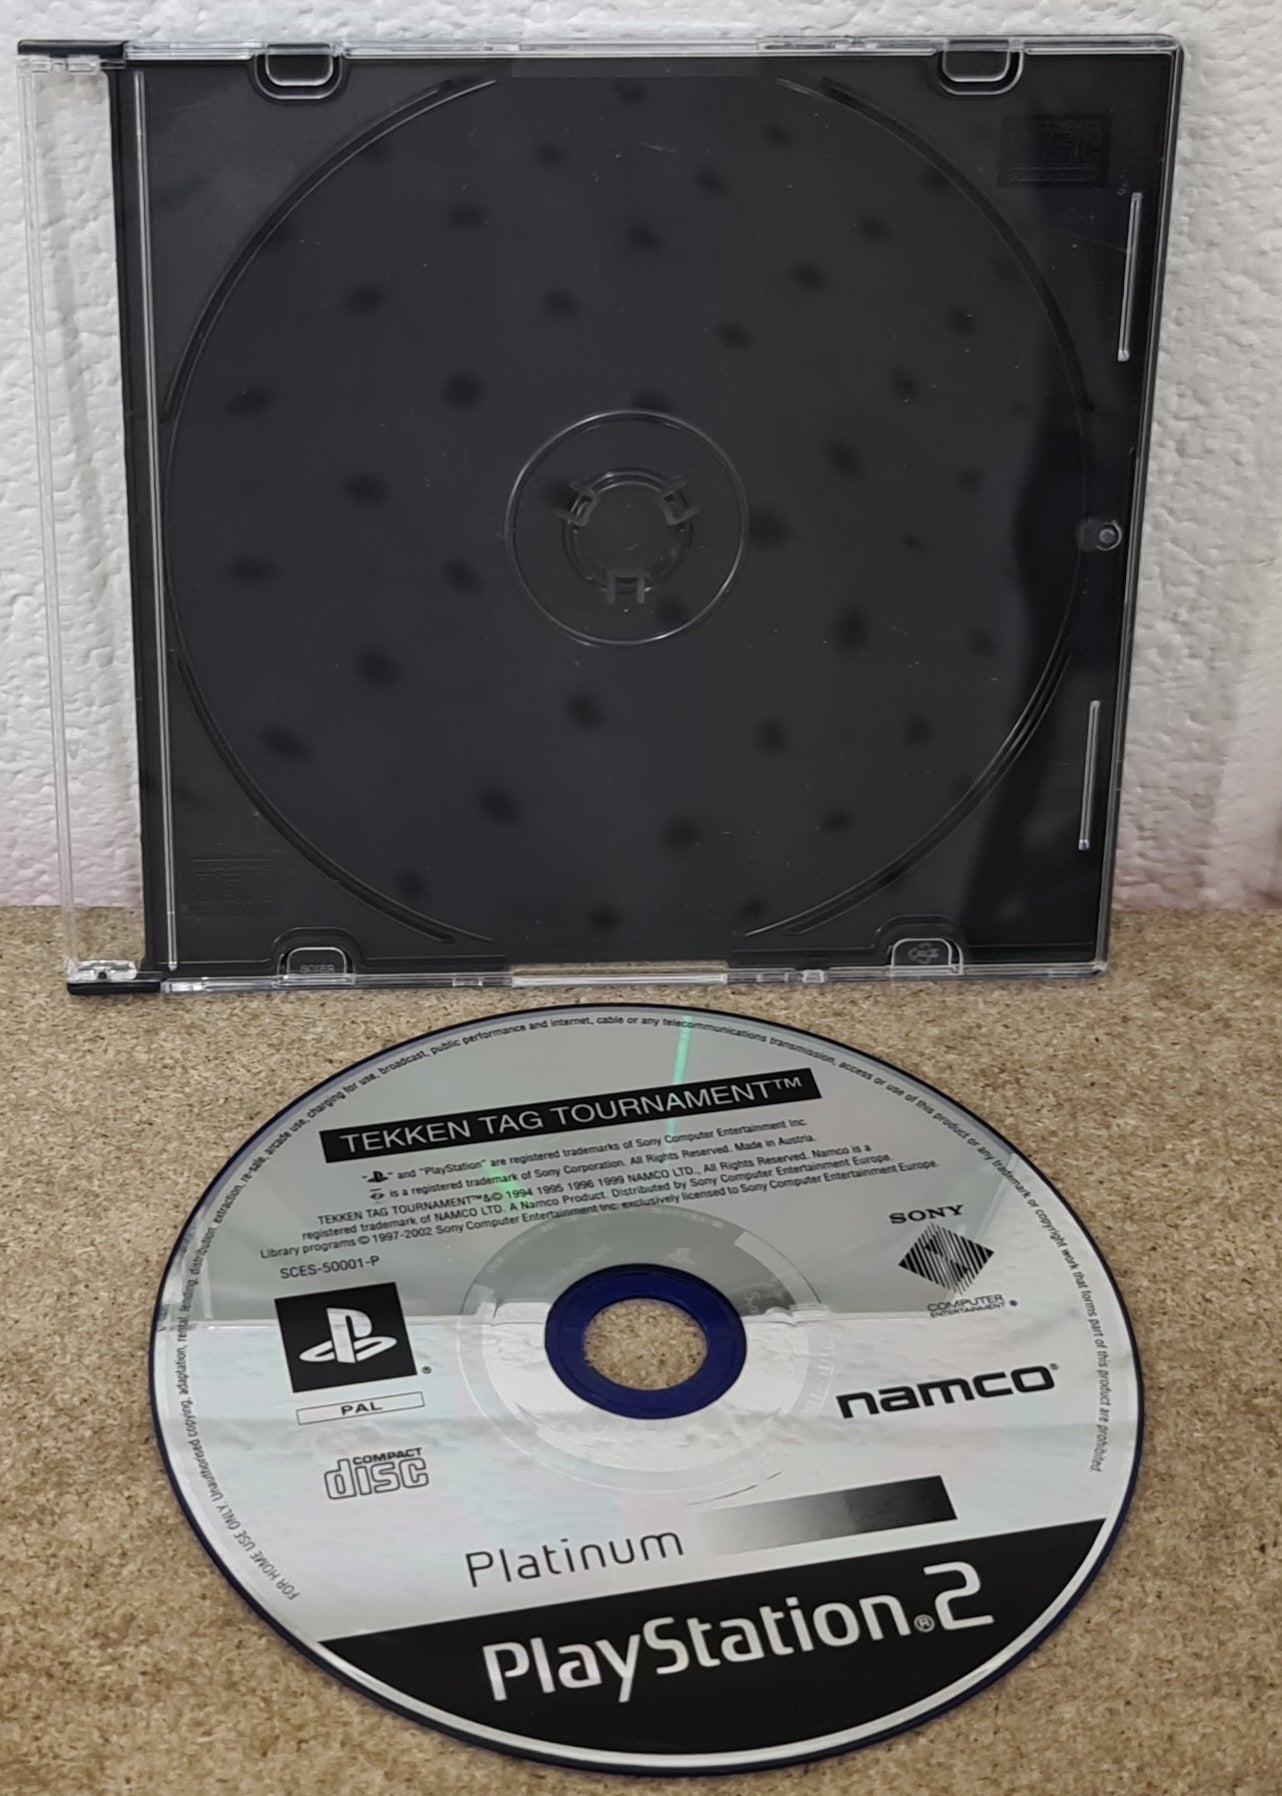 Tekken Tag Tournament Sony Playstation 2 (PS2) Game Disc Only